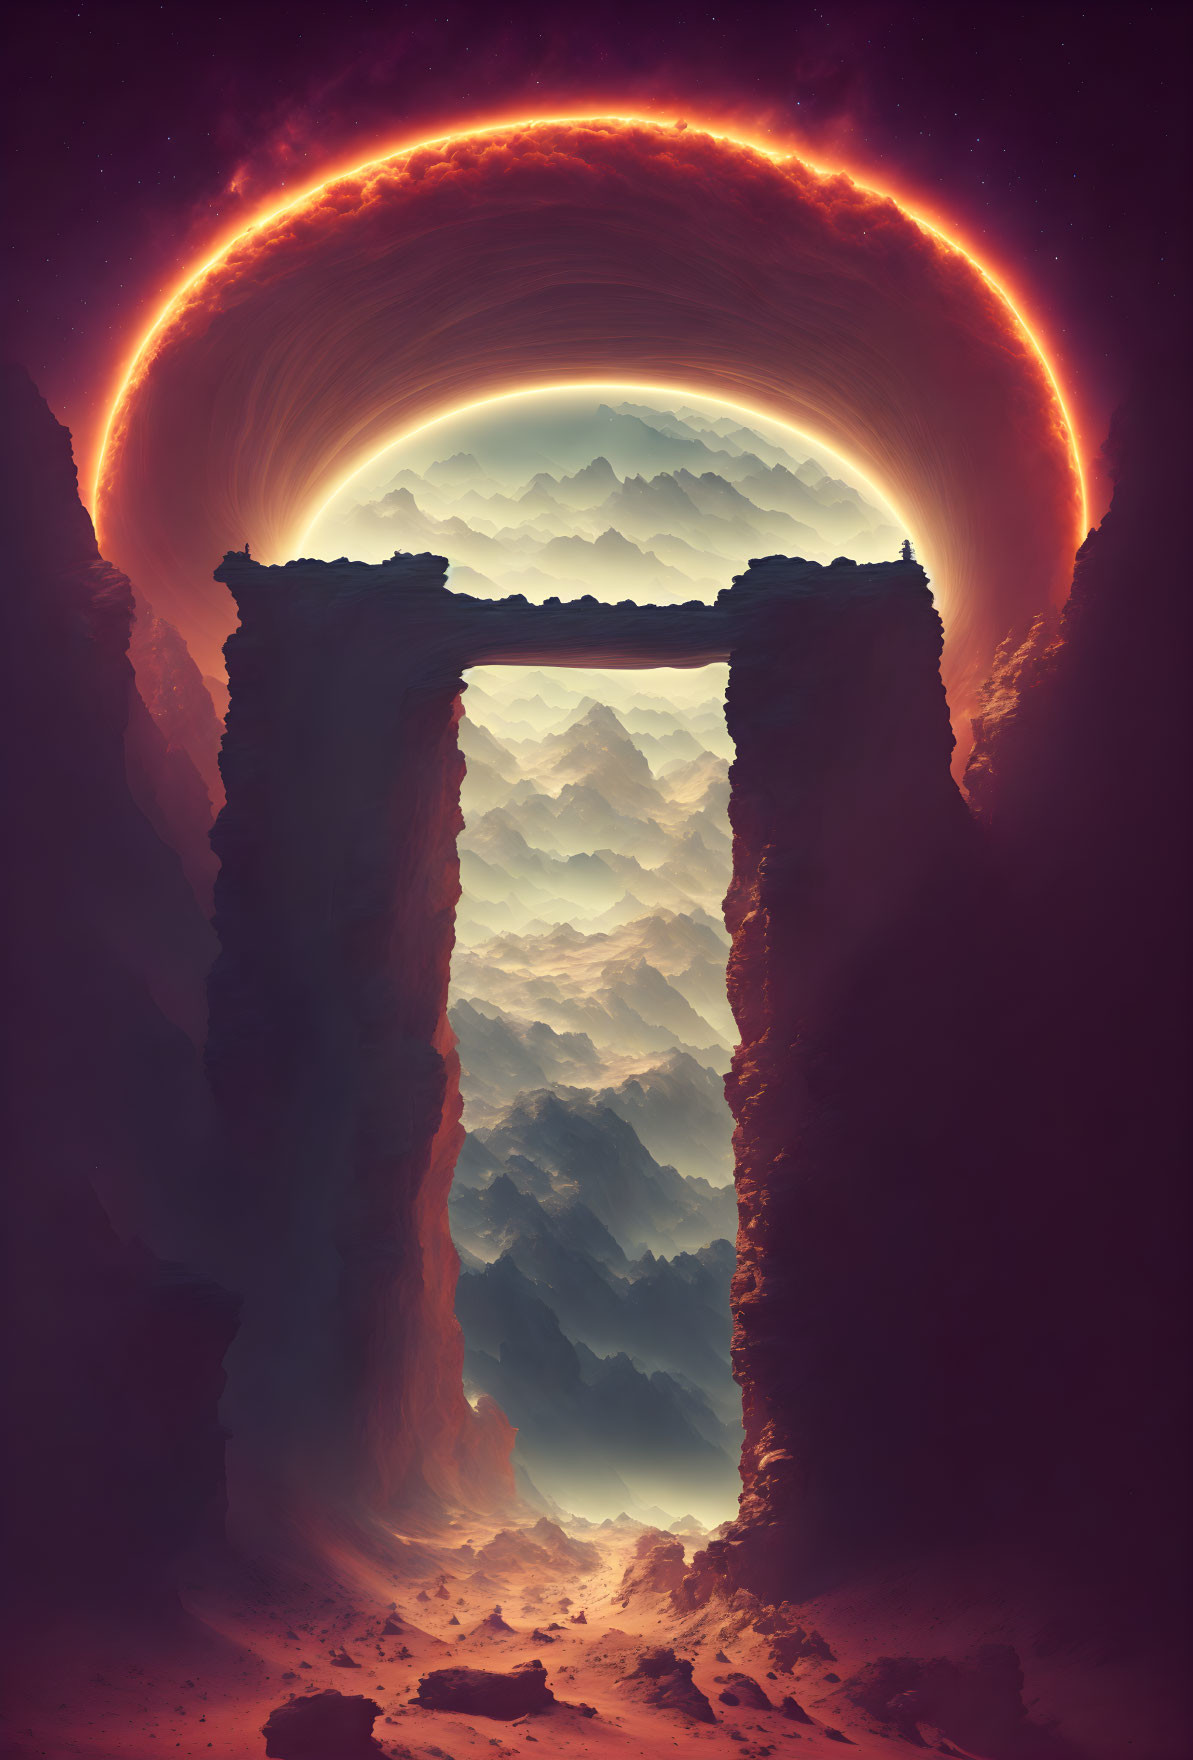 Surreal landscape with rugged archway, cascading mountains, and glowing eclipse